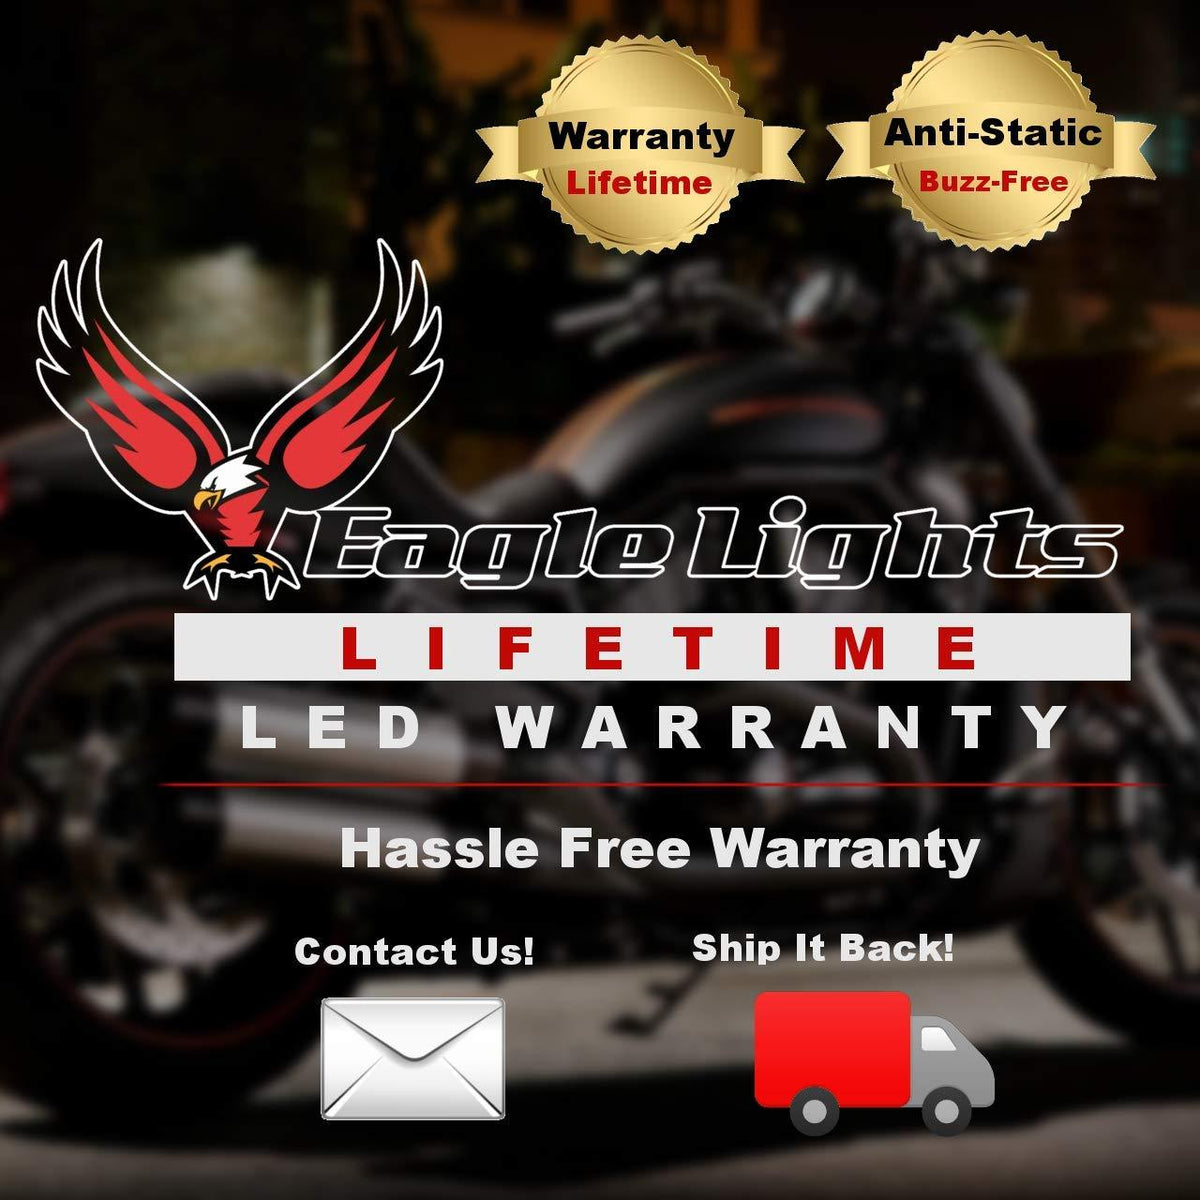 2” LED Front Turn Signals - Eagle Lights Generation II Midnight Edition Rear LED Turn Signals